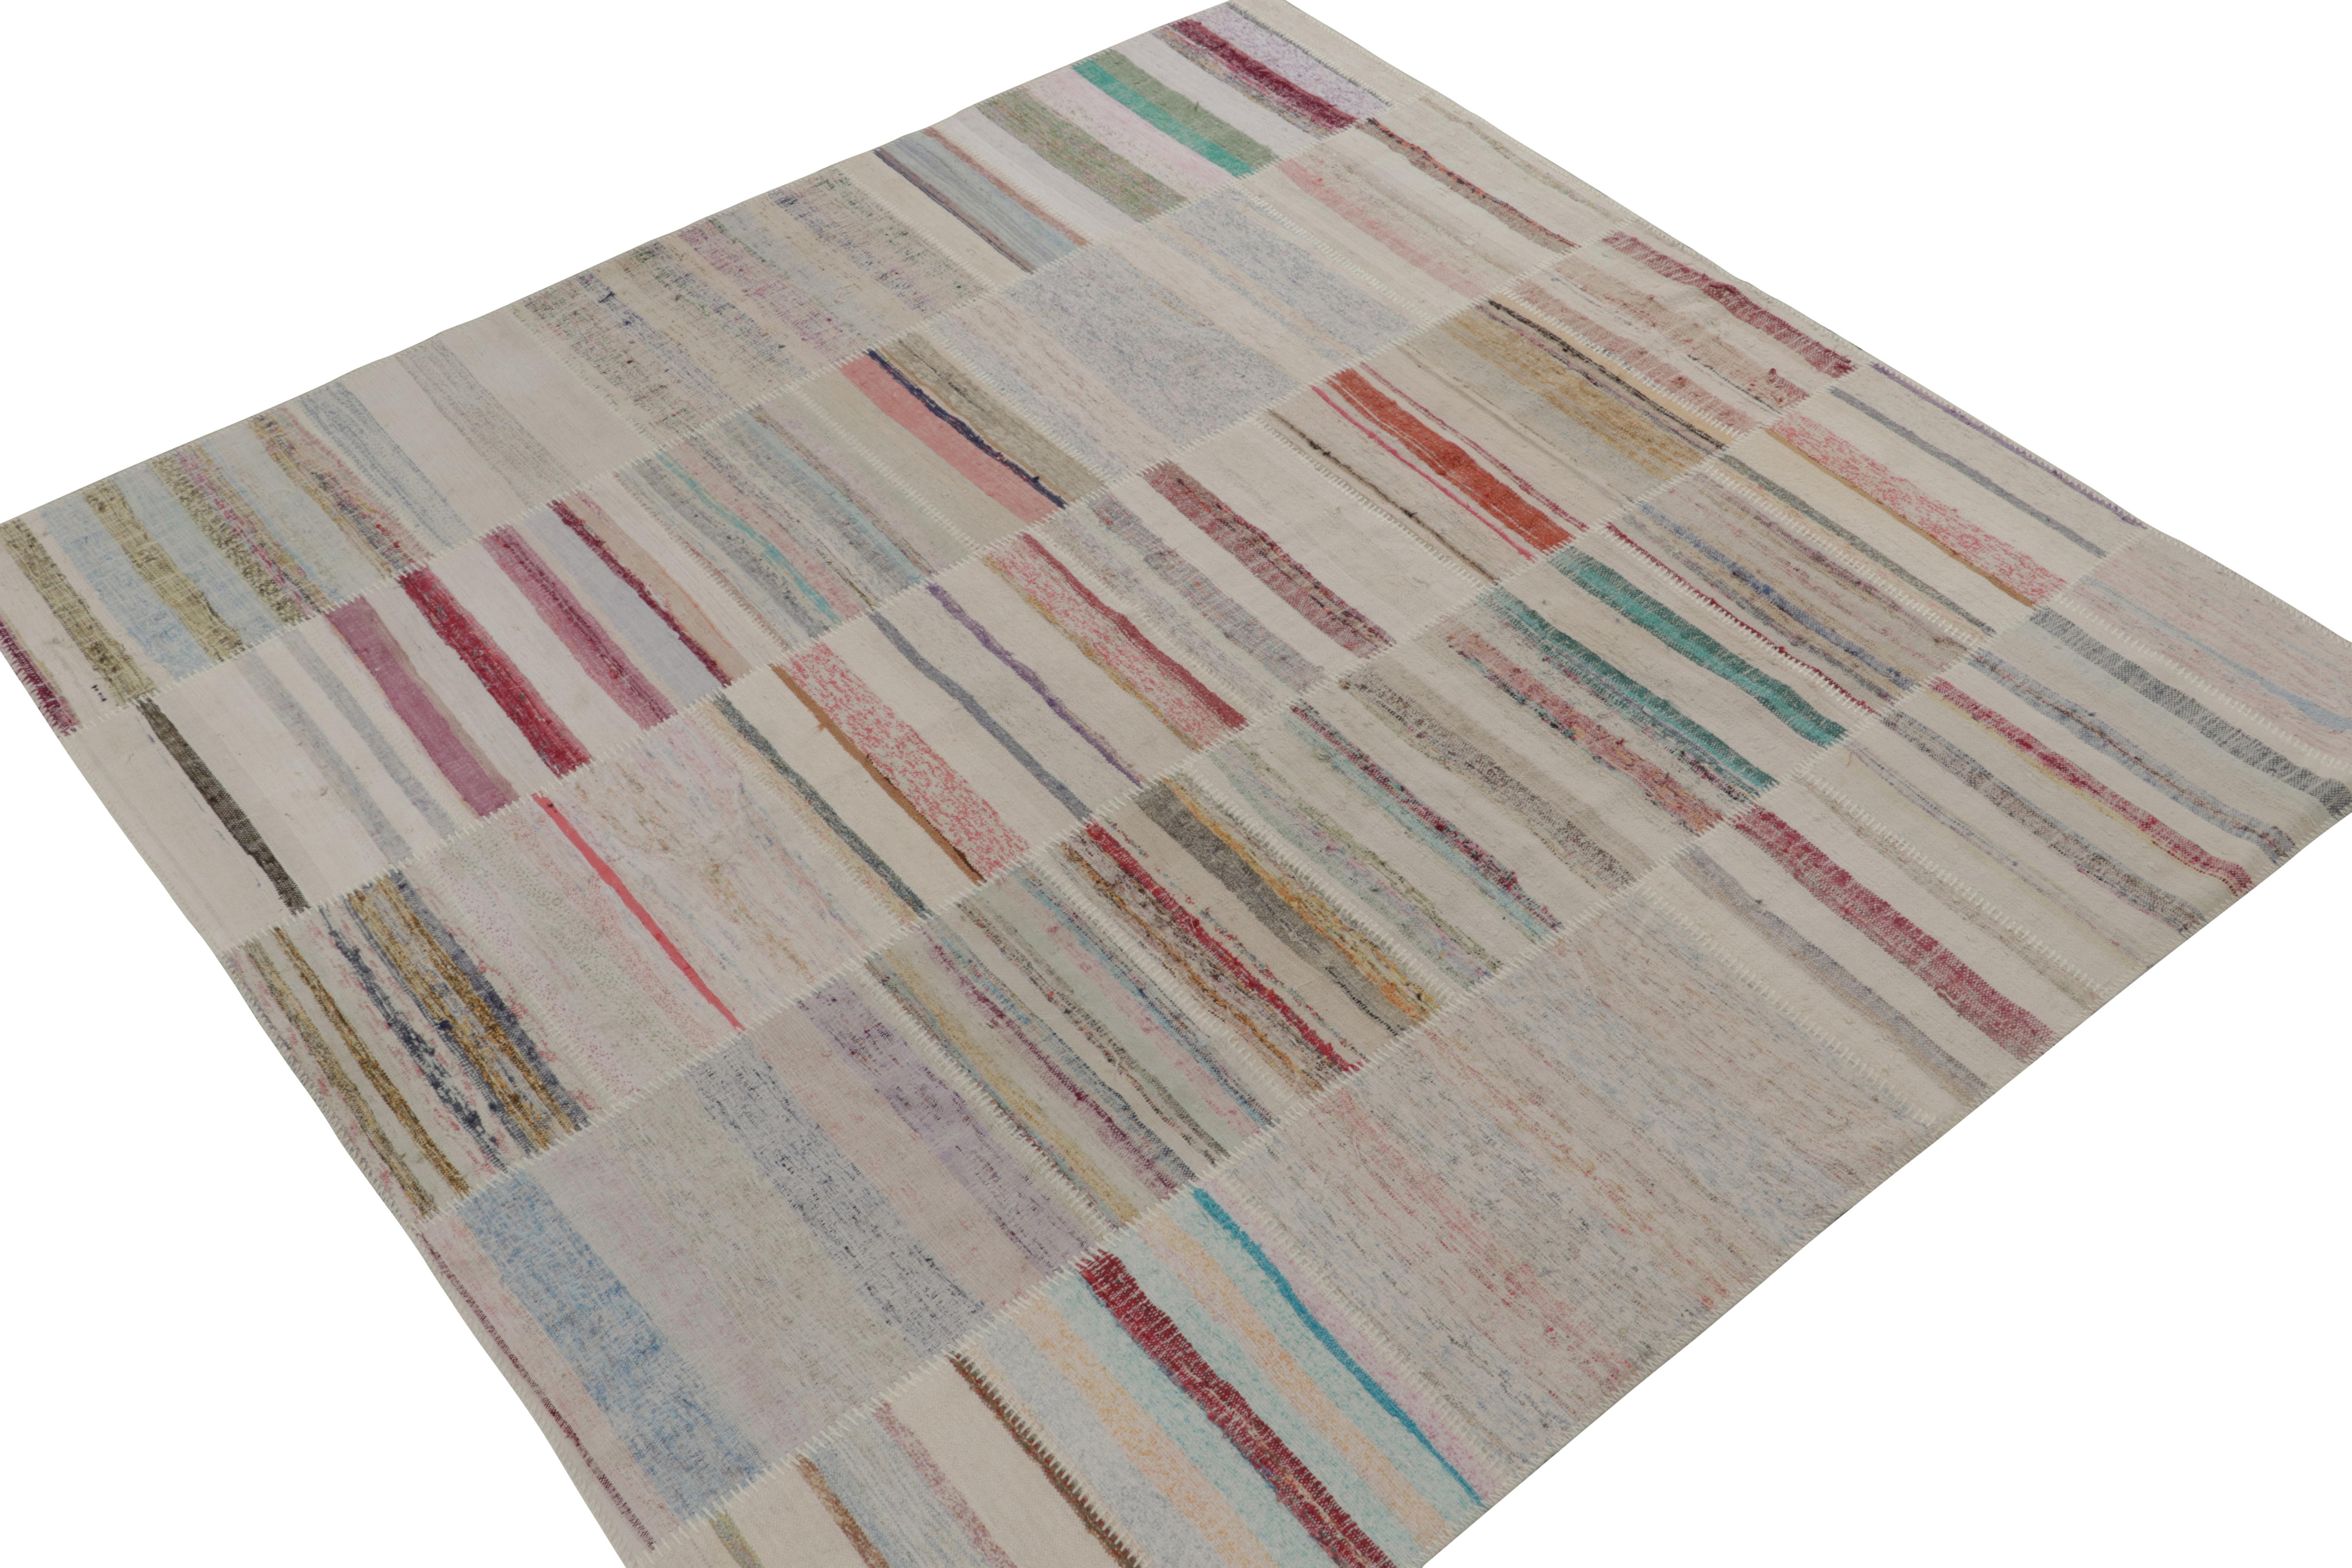 Handwoven in wool, Rug & Kilim presents a 9x9 contemporary square rug from their innovative new patchwork kilim collection. 

On the Design: 

This flat weave technique repurposes vintage yarns in polychromatic stripes and striae, achieving a